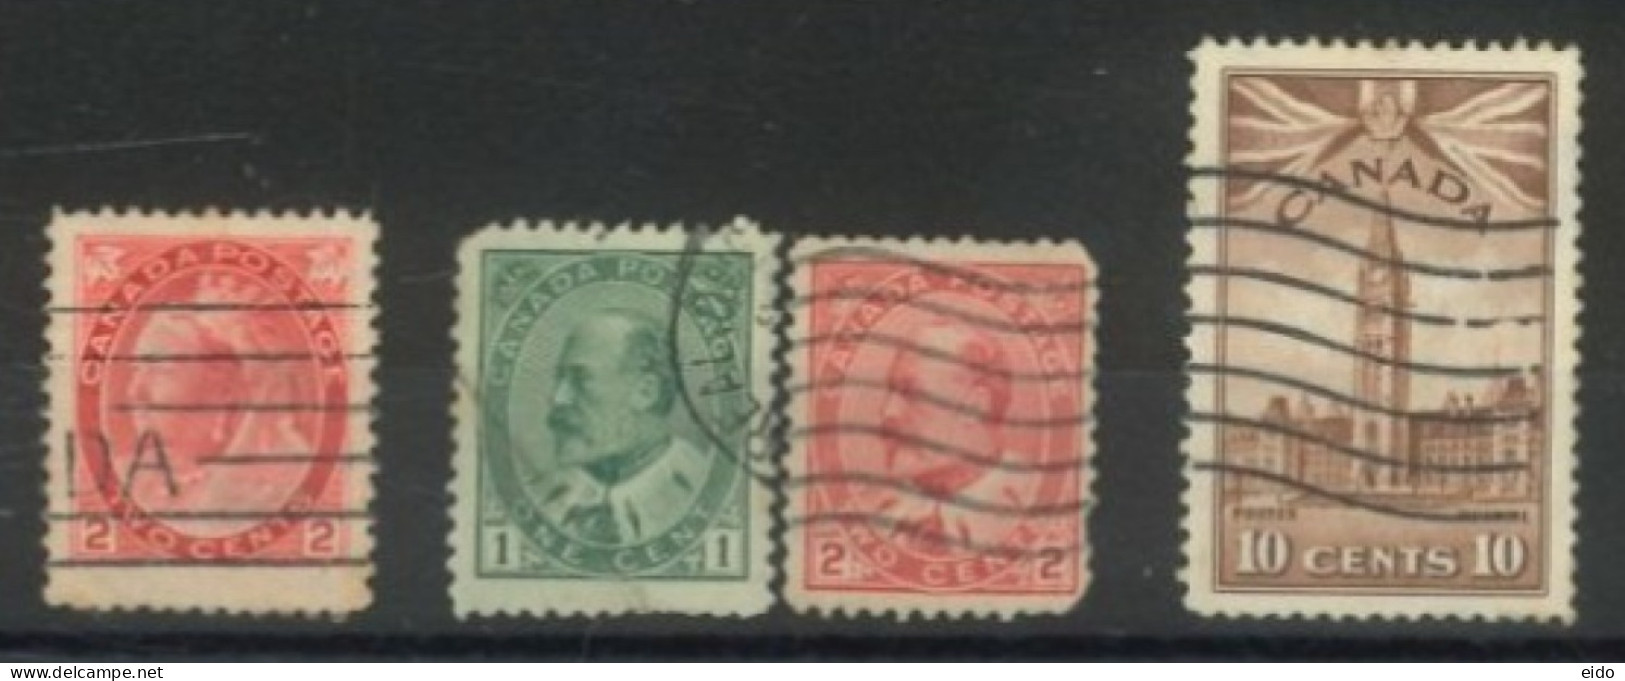 CANADA -  STAMPS SET OF 4, USED. - Used Stamps